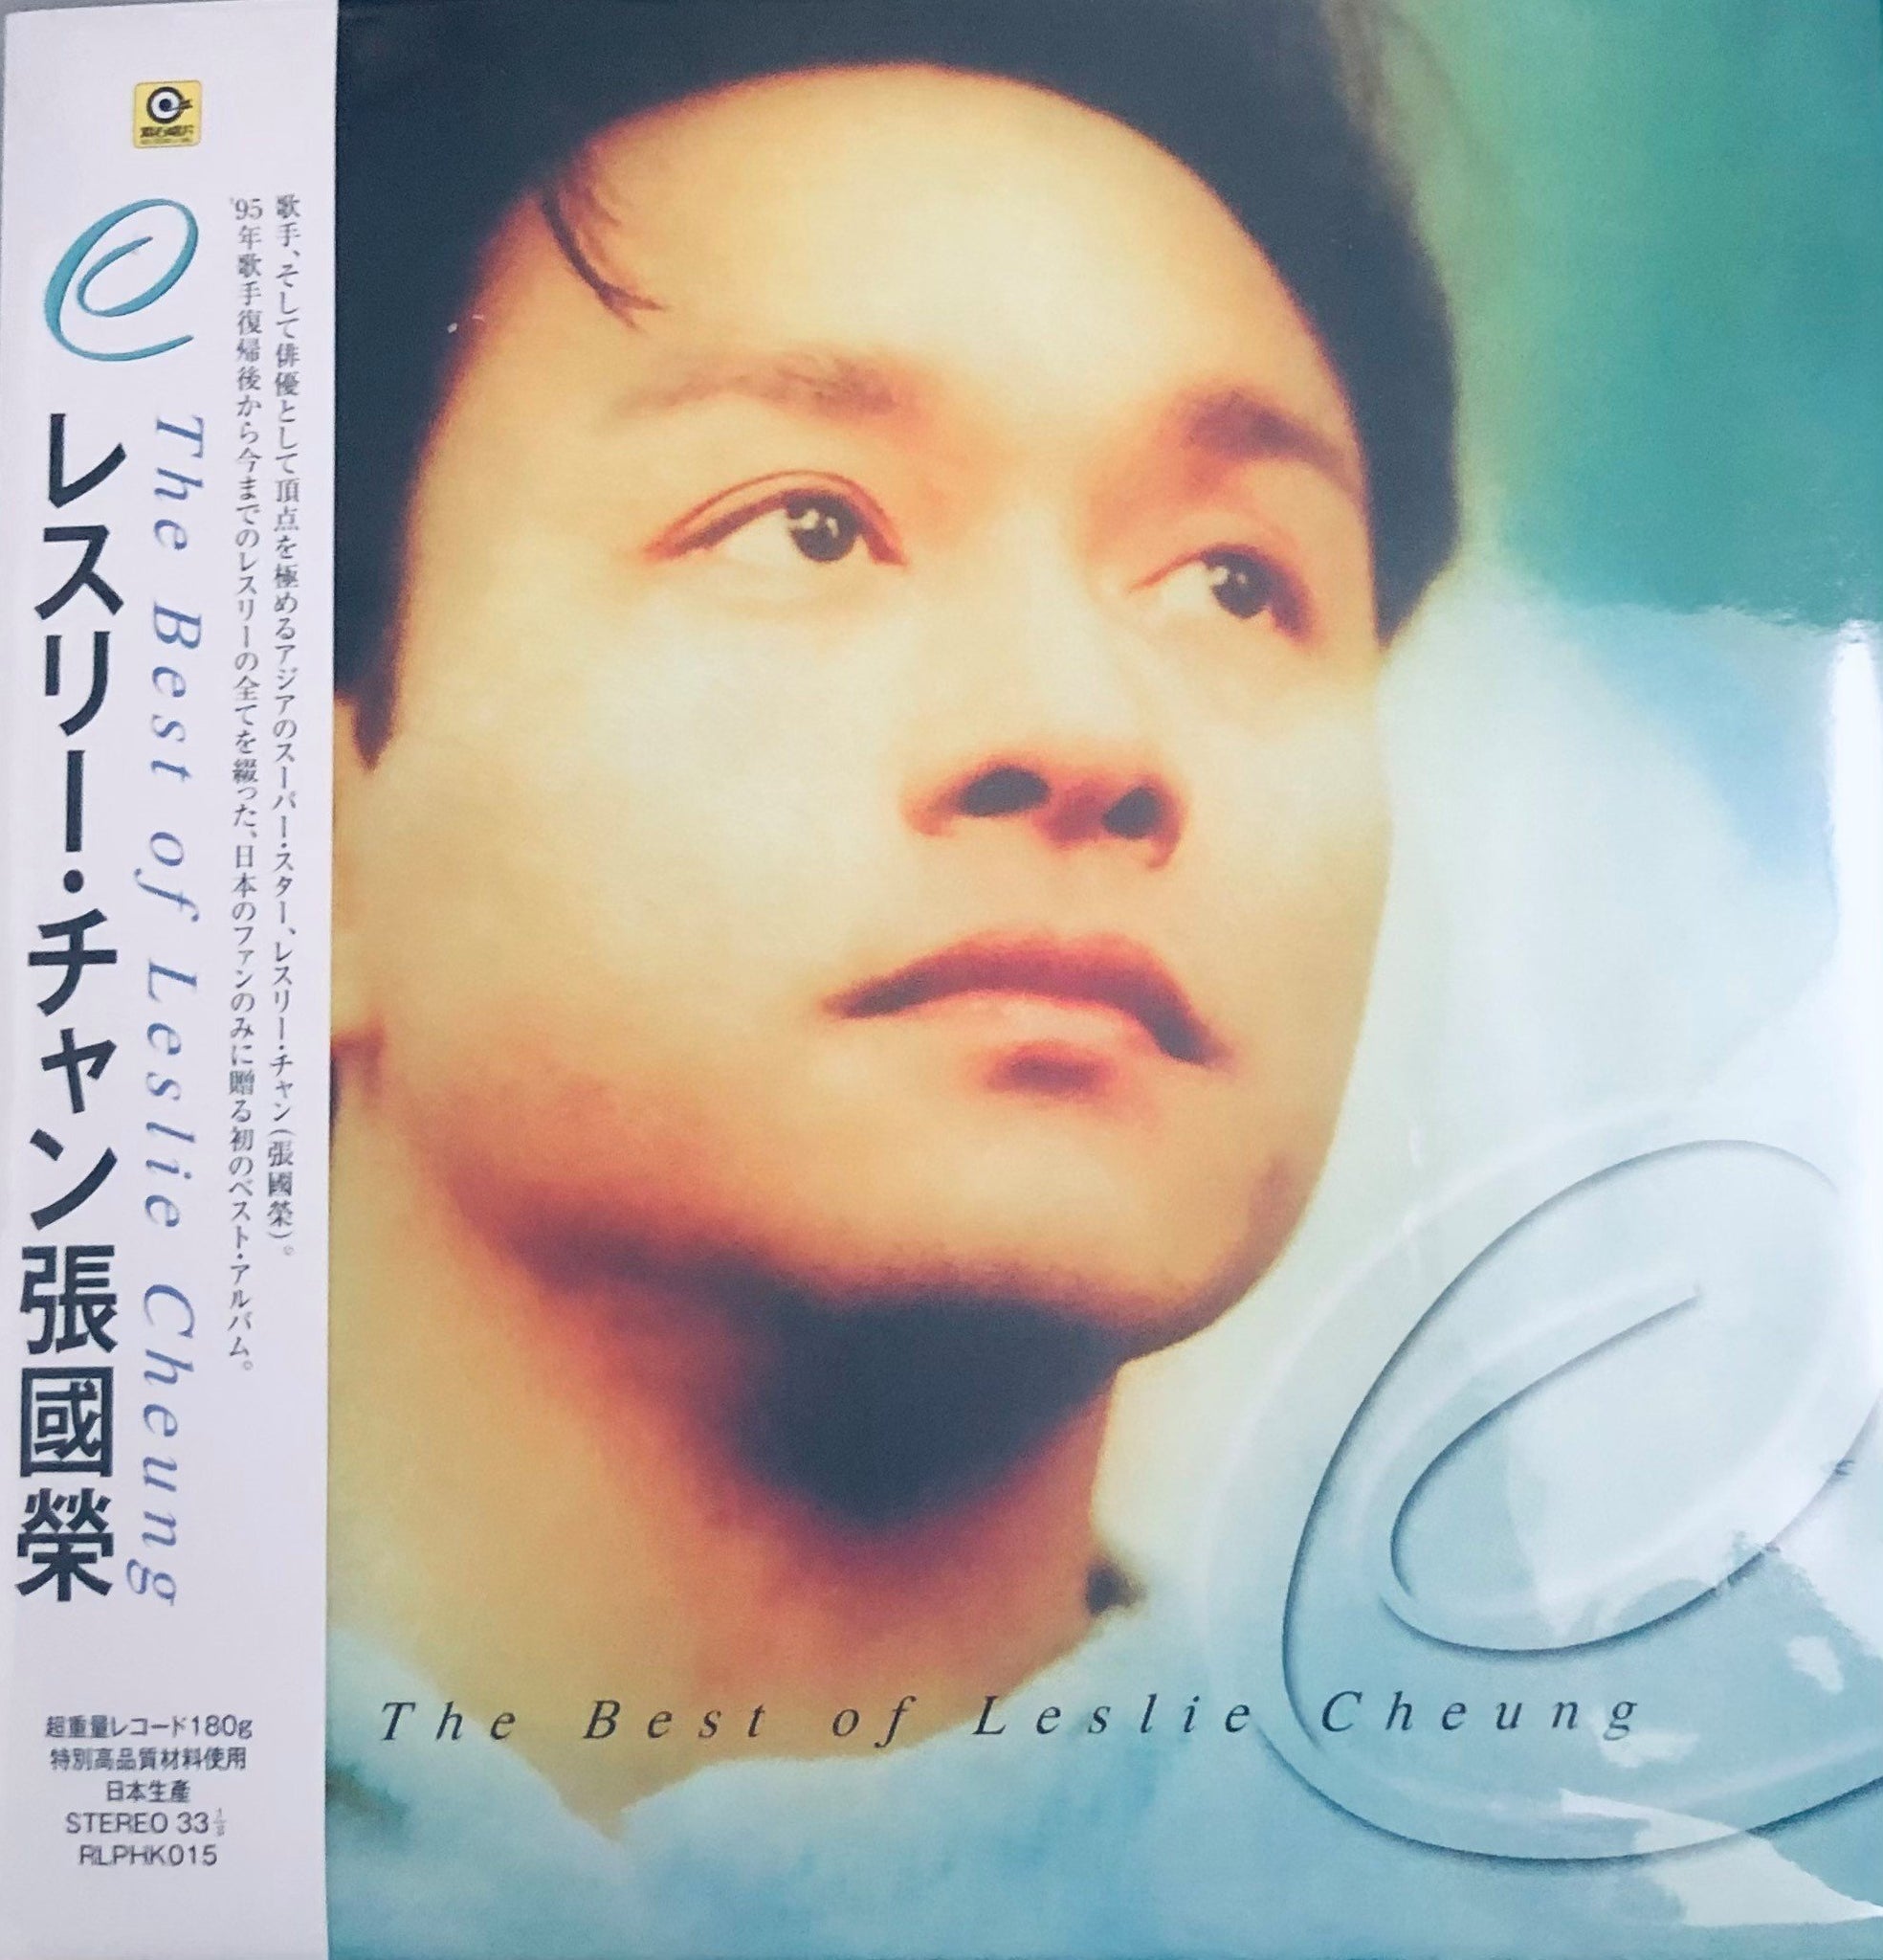 LESLIE CHEUNG - 張國榮 THE BEST OF LESLIE CHEUNG (GREEN VINYL) MADE IN JAPAN